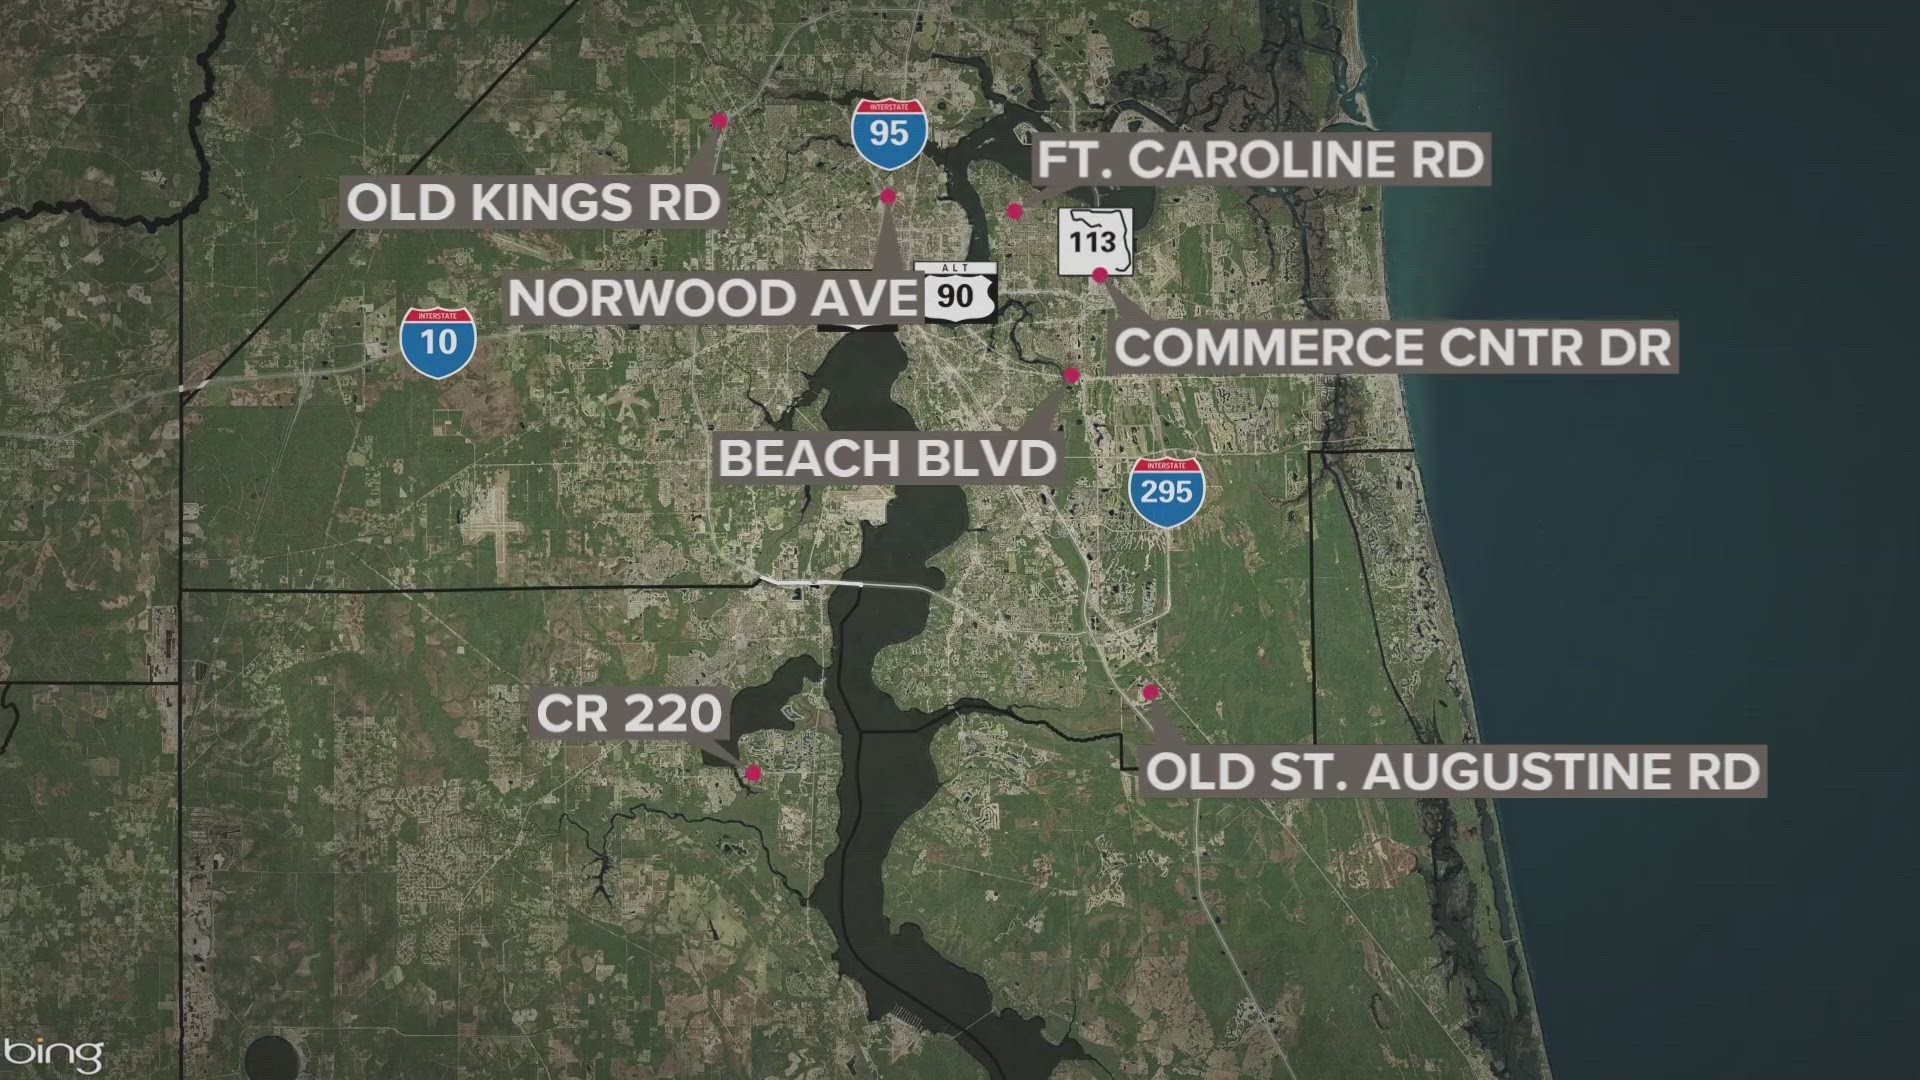 The threats were made to six Jacksonville Planet Fitness locations and a seventh location in Fleming Island.